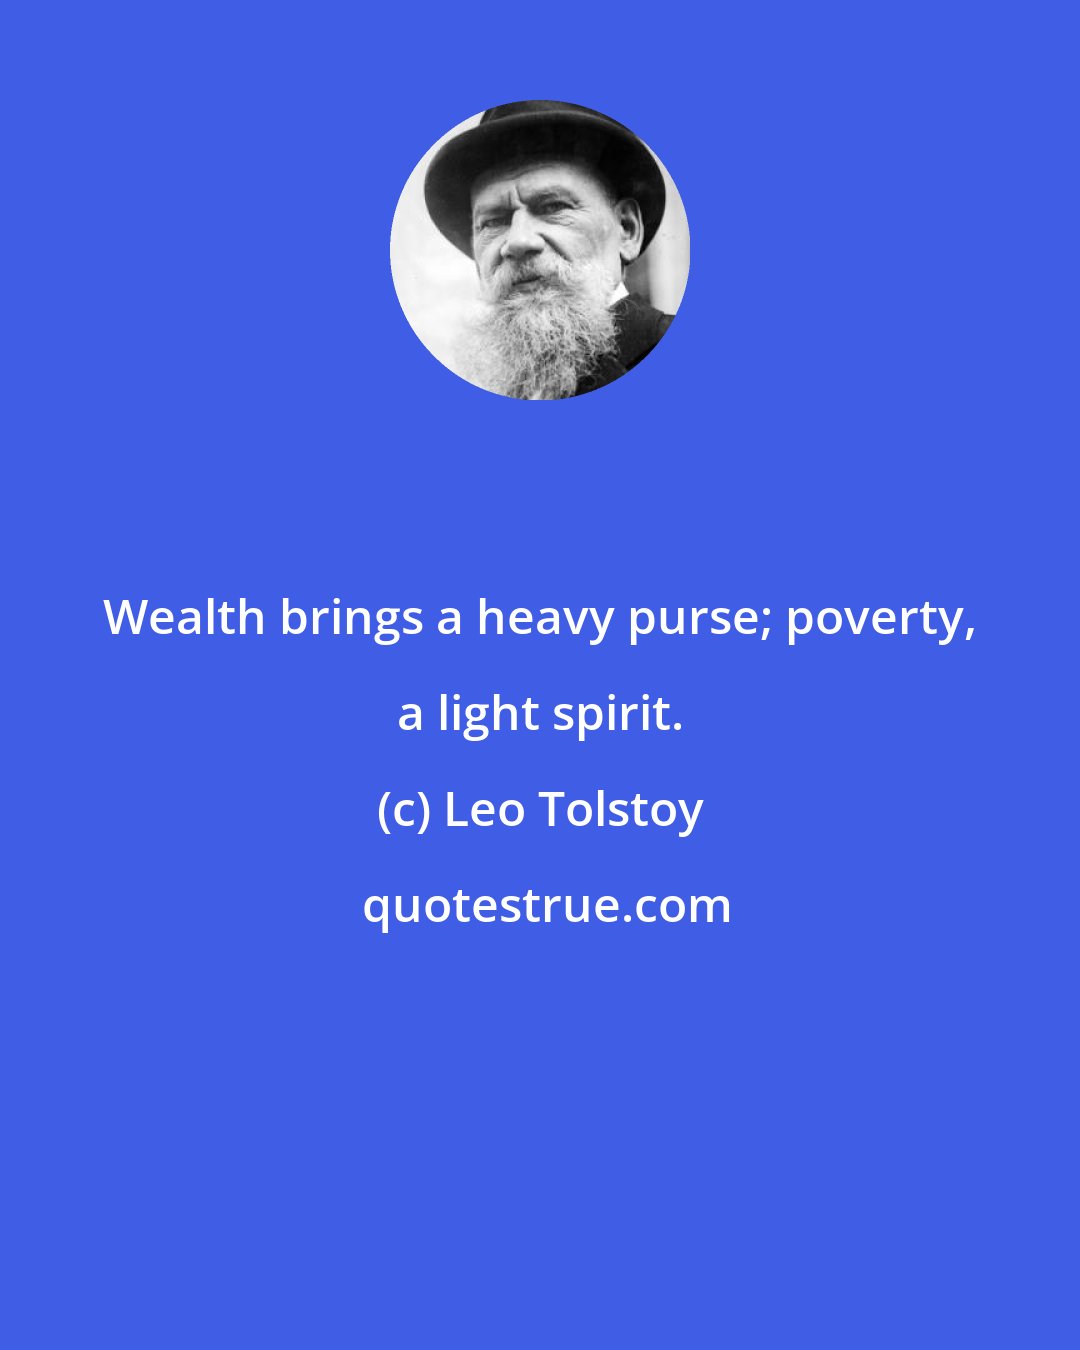 Leo Tolstoy: Wealth brings a heavy purse; poverty, a light spirit.